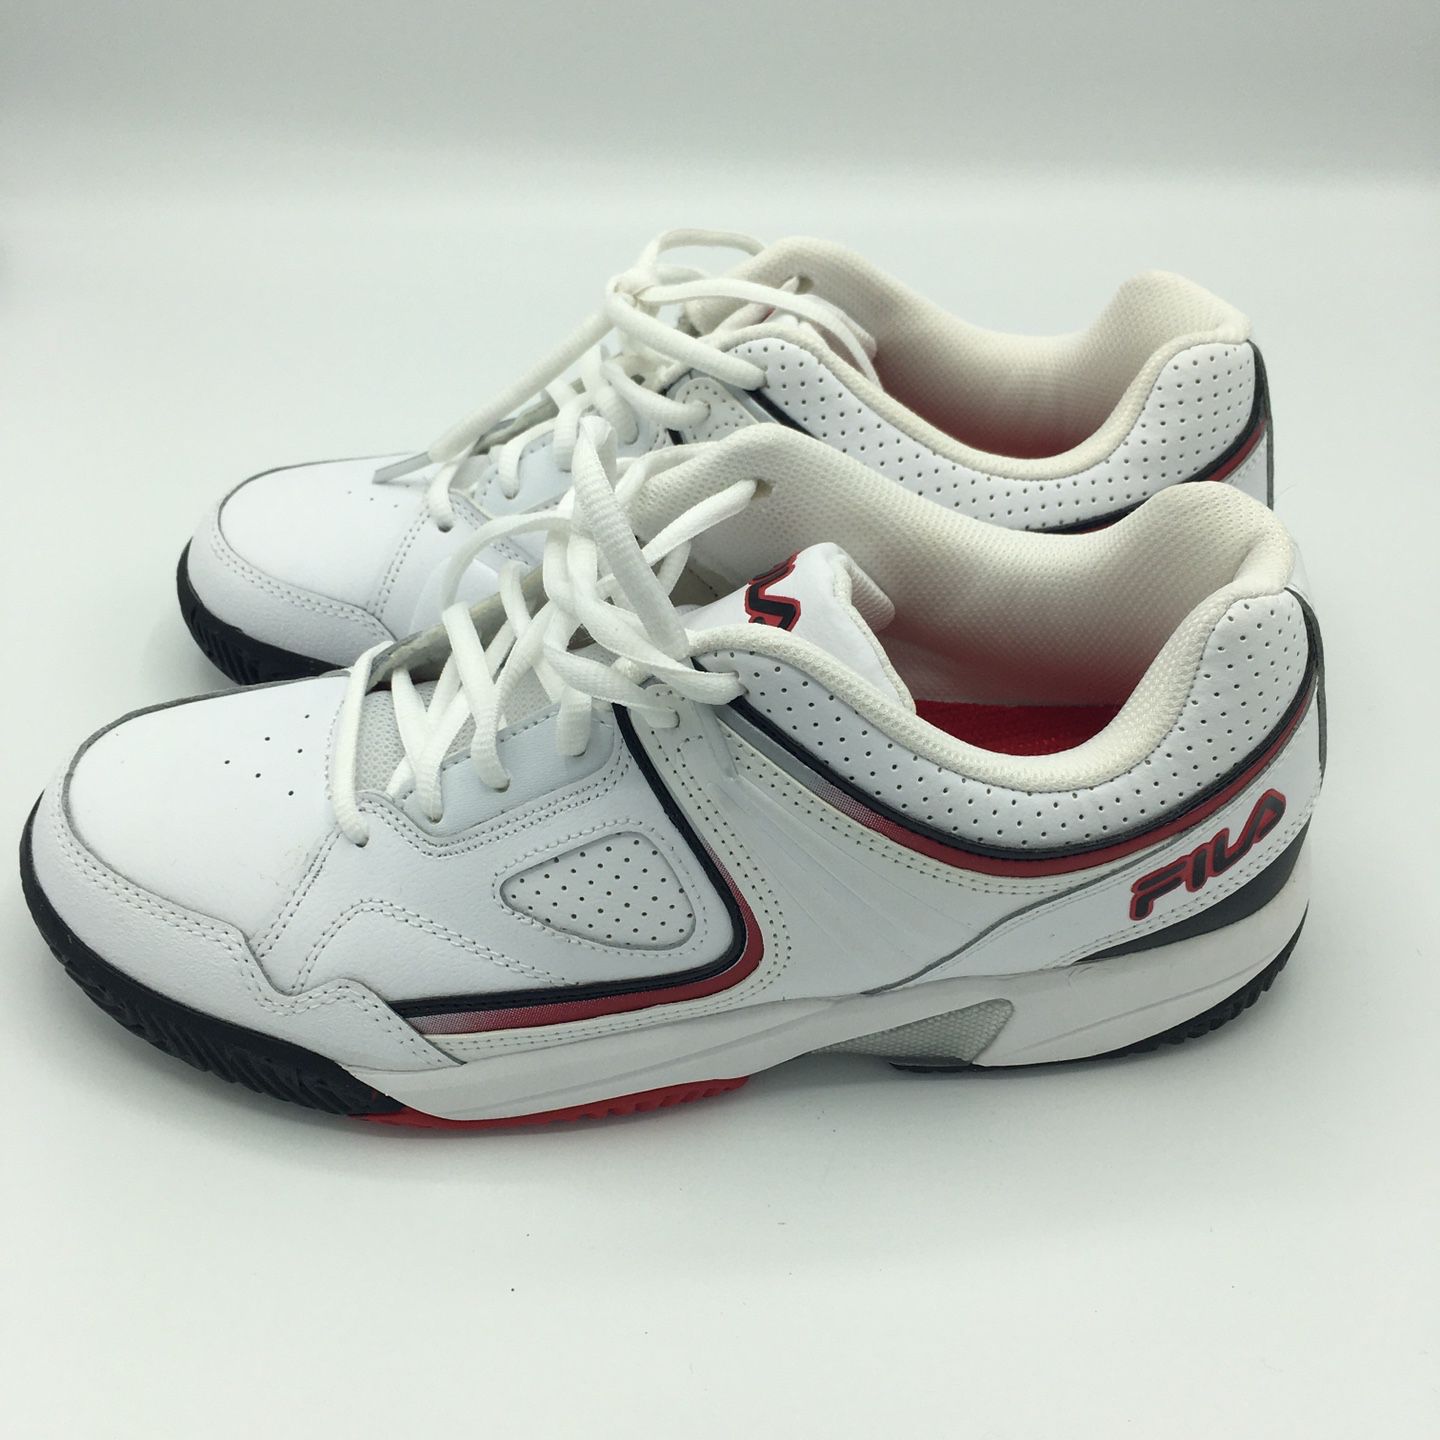 Fila Rovello Men's Court Shoes for Sale in Los Angeles, CA - OfferUp